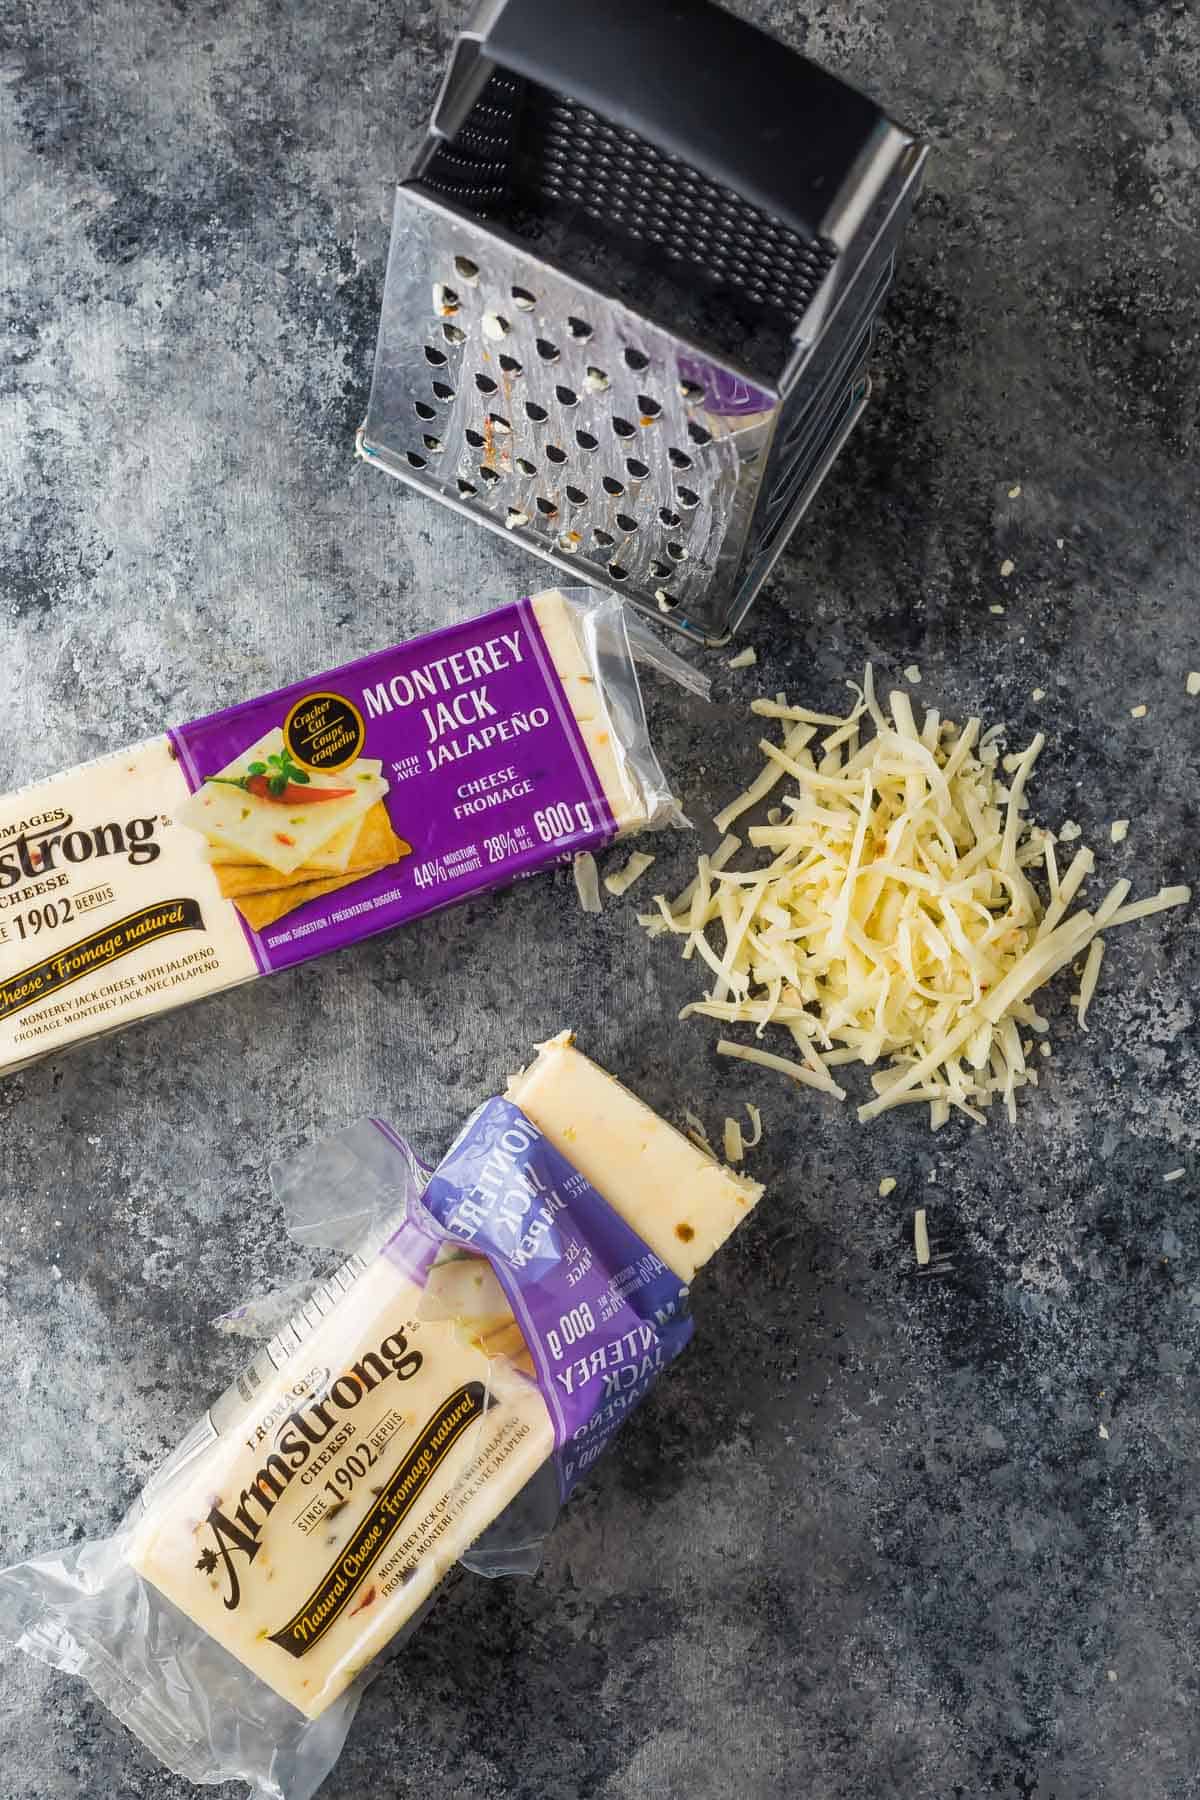 Two packages of Armstrong Monterey Jack Jalapeno cheese and a cheese grater